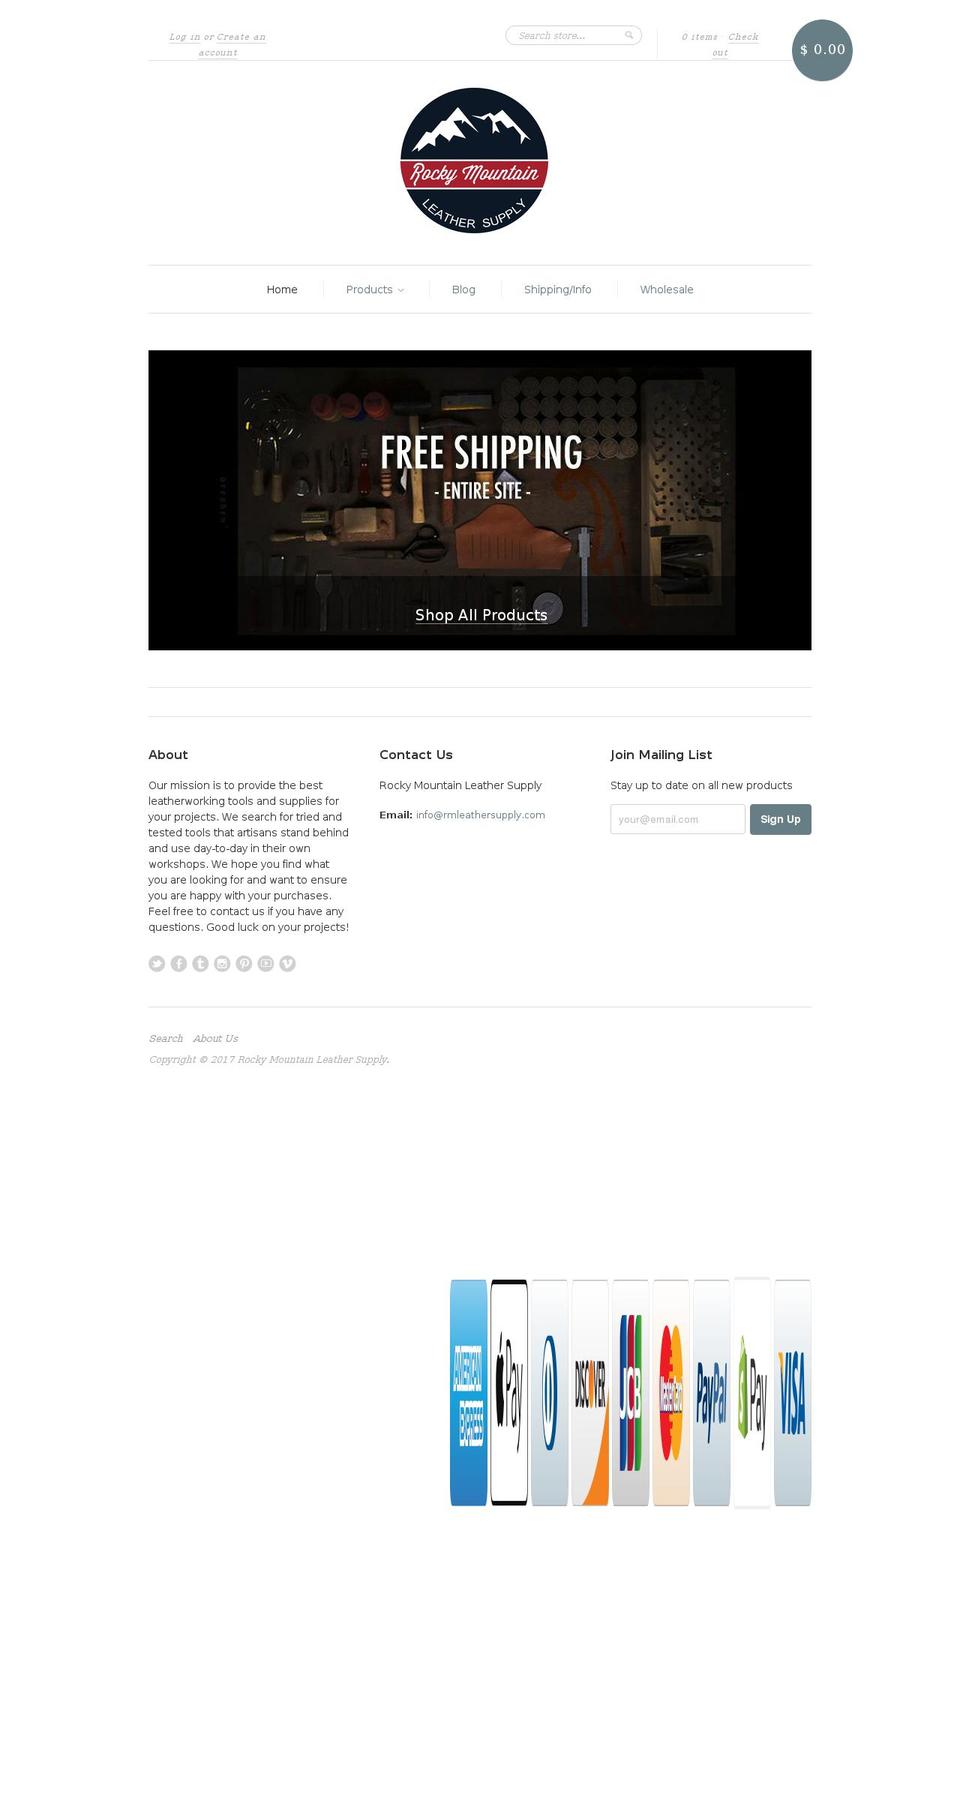 Focal Shopify theme site example rmleathersupply.com